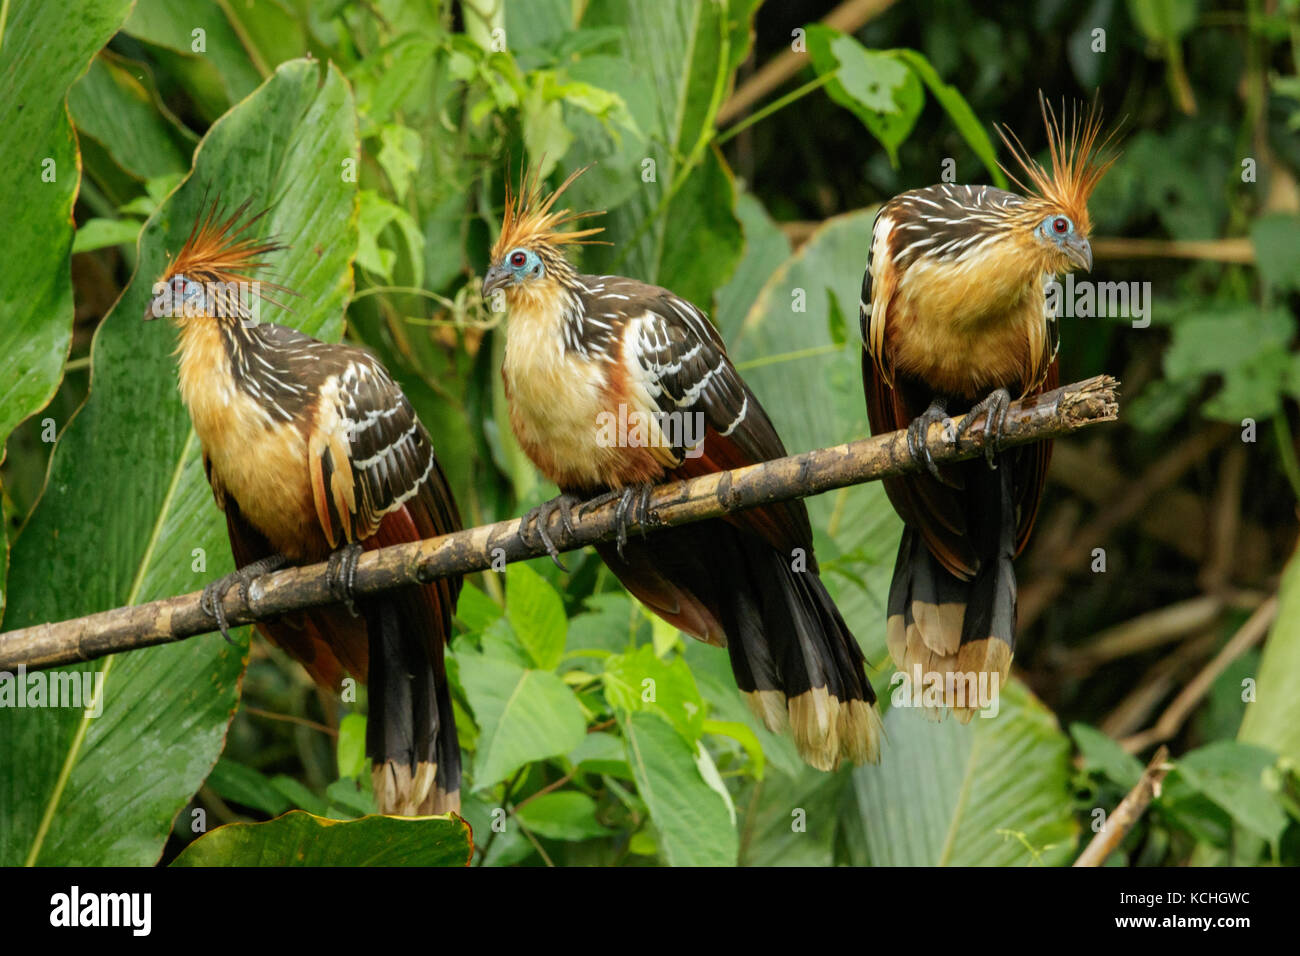 Hoatzin (Opisthocomus hoazin) perched on a branch in Manu National Park, Peru. Stock Photo